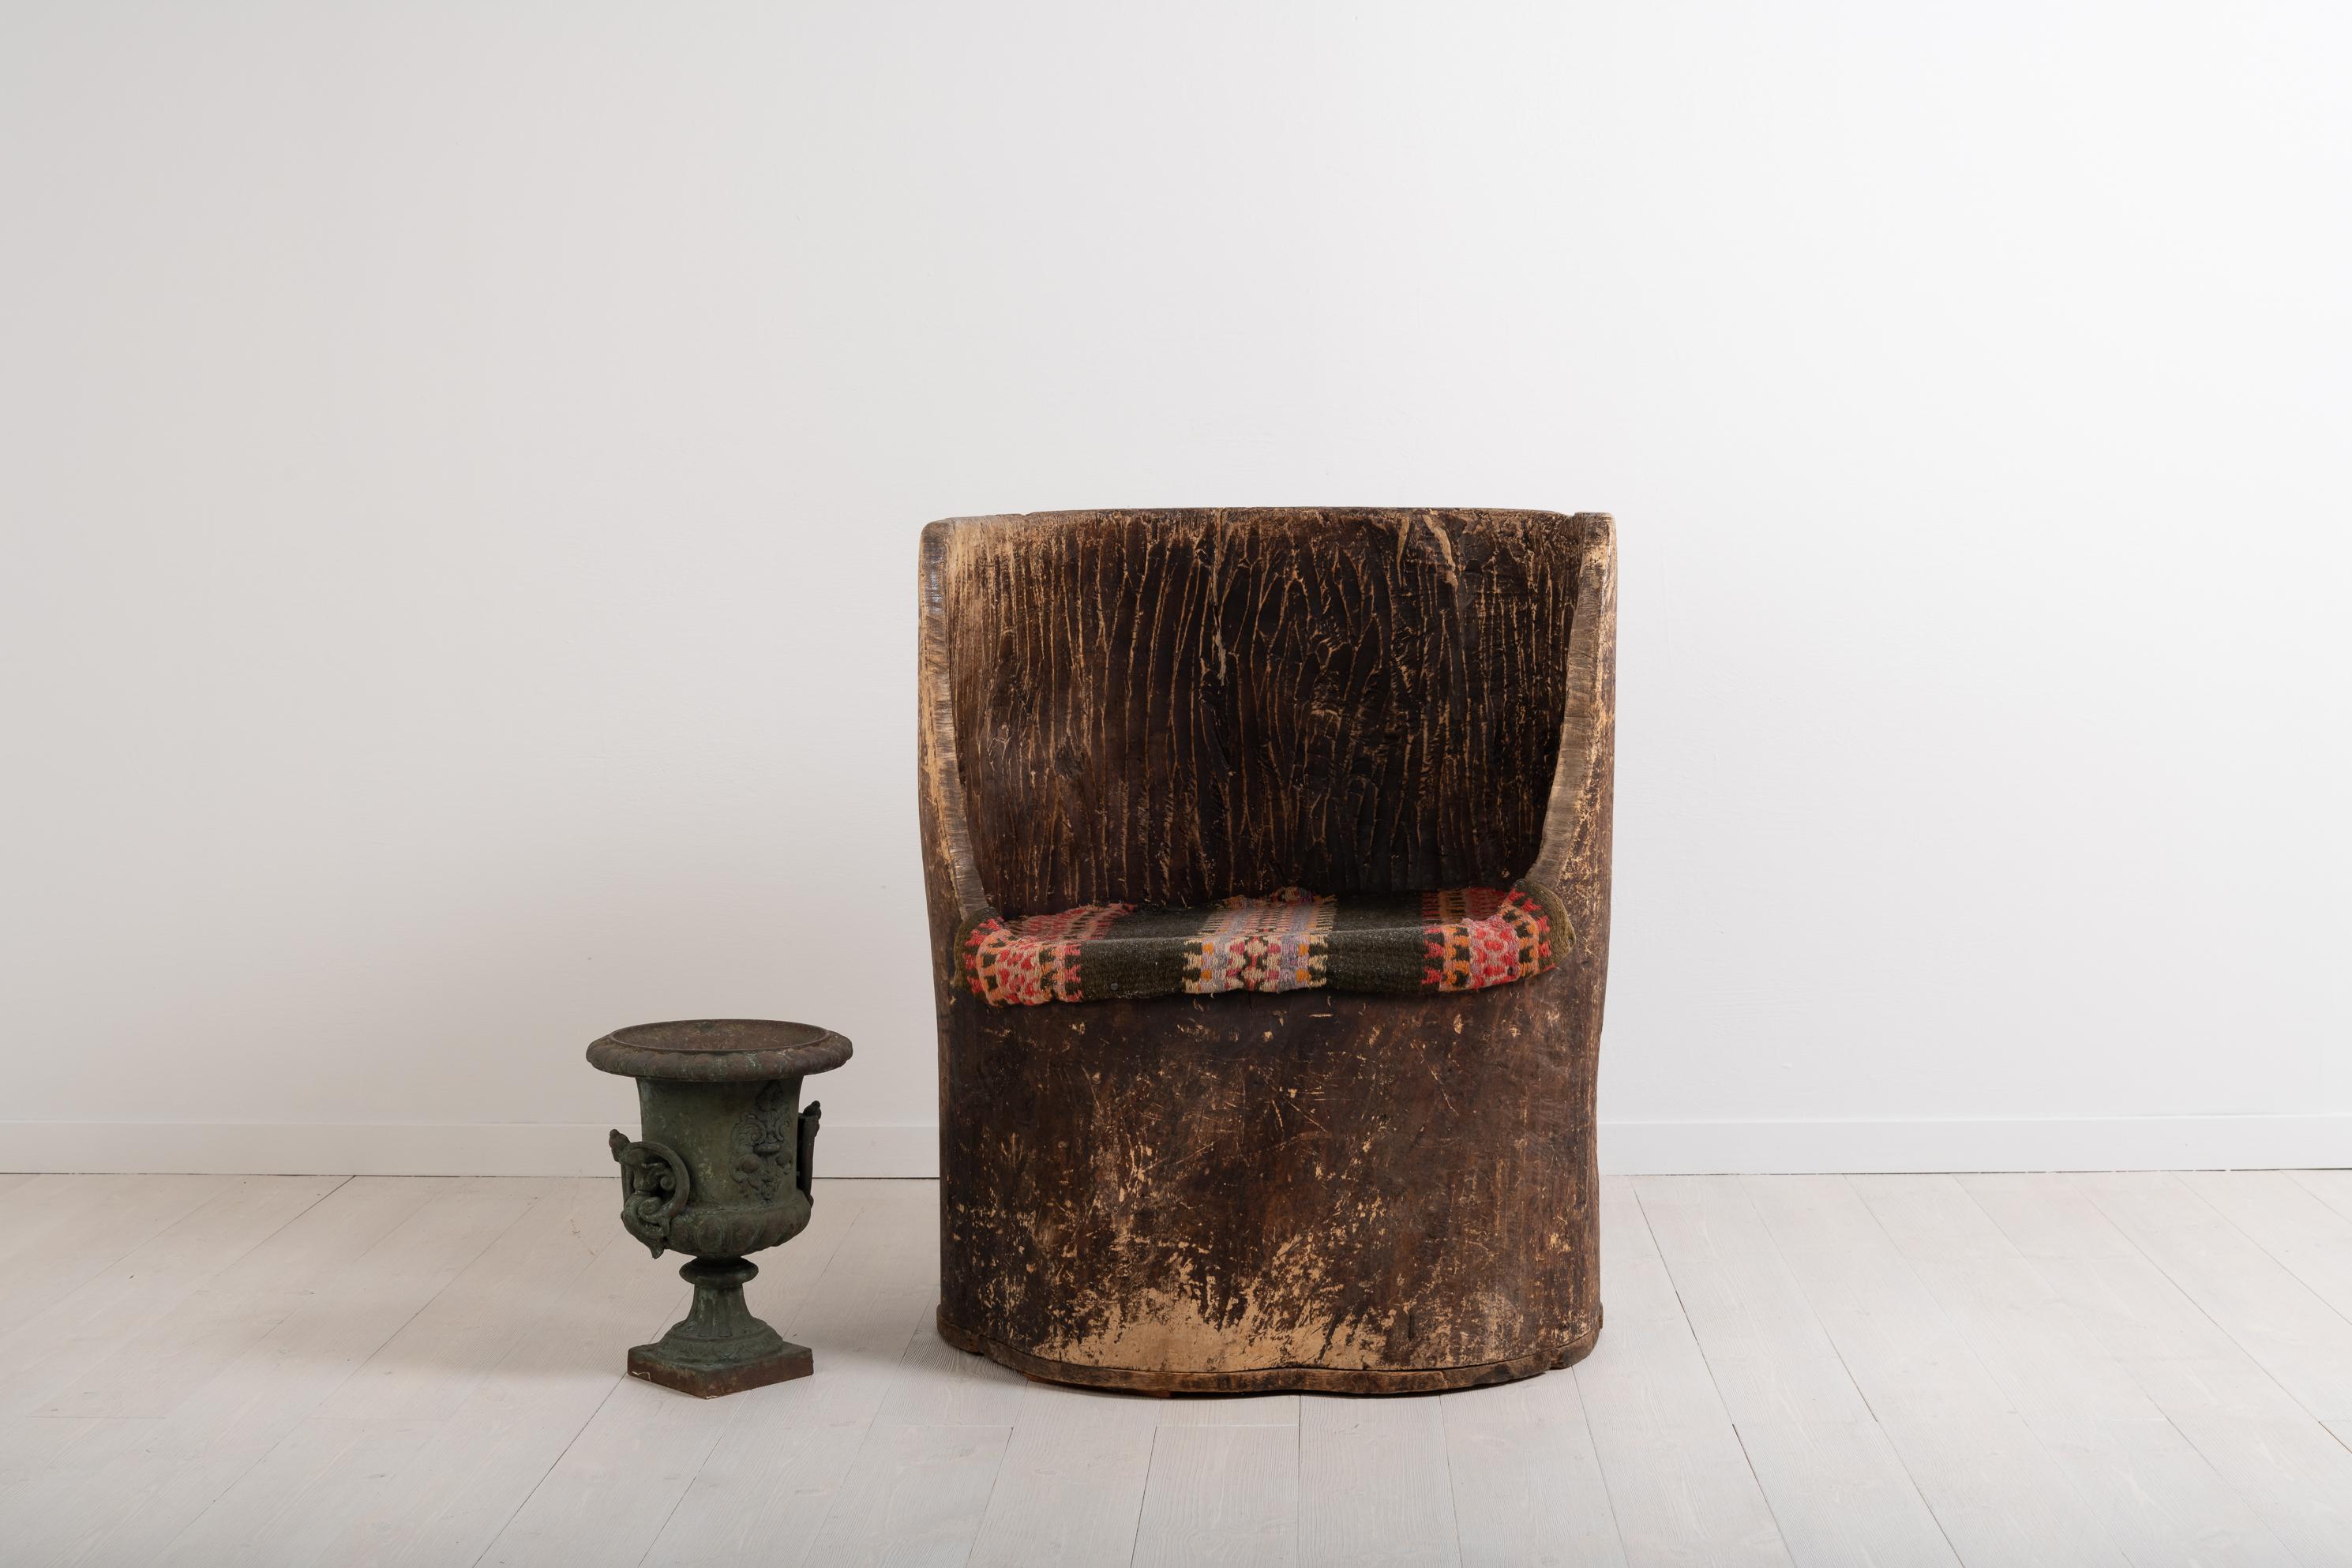 Swedish Folk Art kubbstol manufactured from a single piece of wood. The log has been hollowed out and shaped into a chair. Because of the material the shape is organic and slightly irregular. Old-fashioned with visible marks from the tools used to